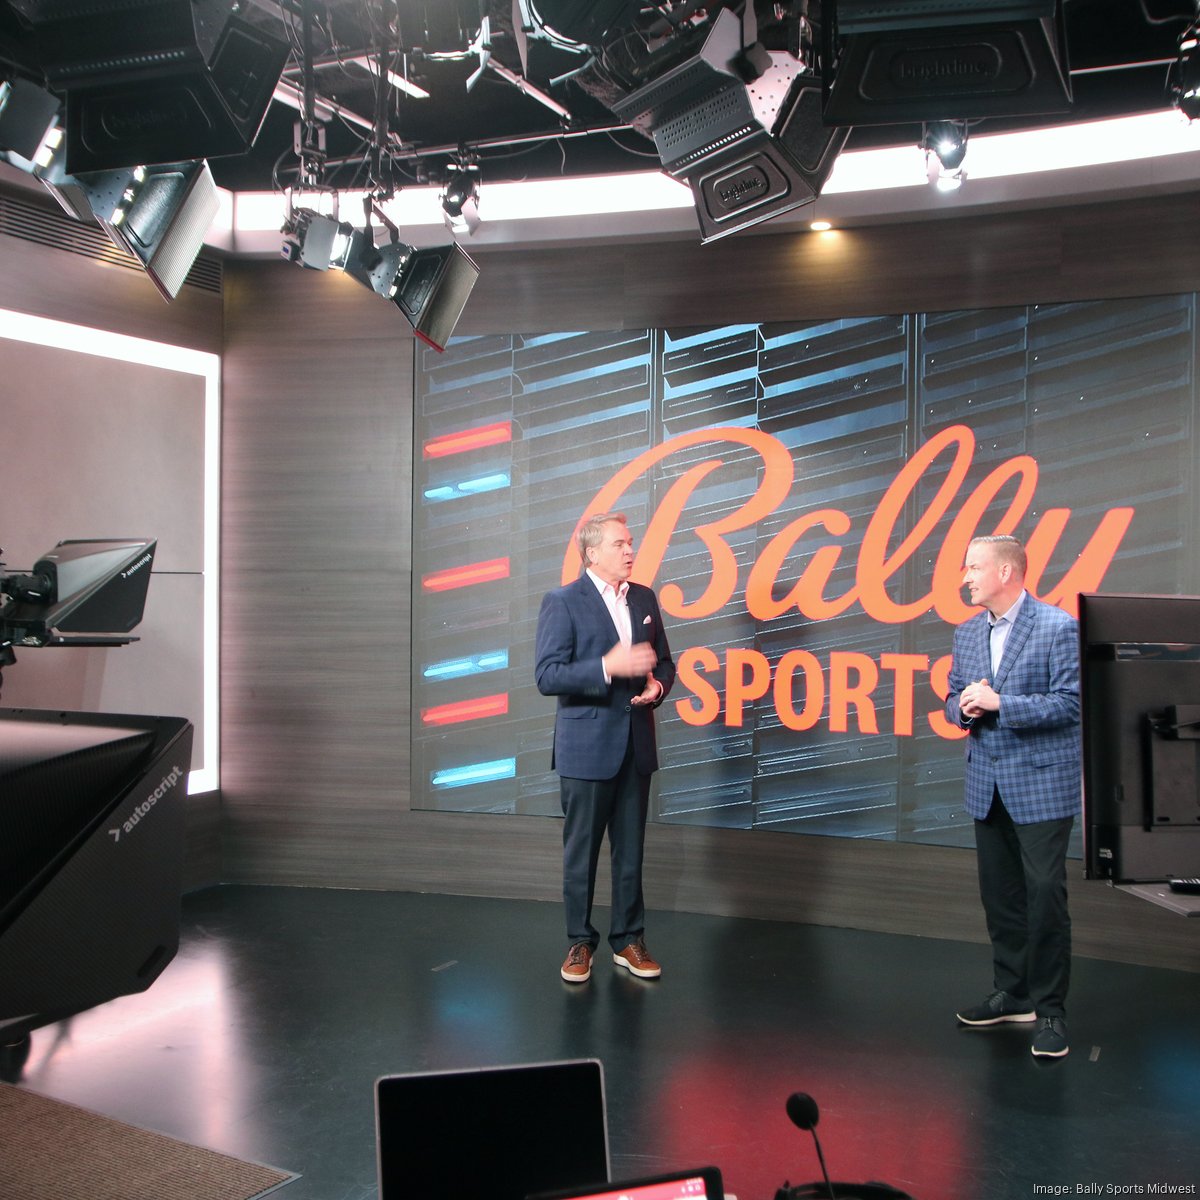 Short-term pain Blues, Cardinals grapple with fallout of possible Bally Sports bankruptcy